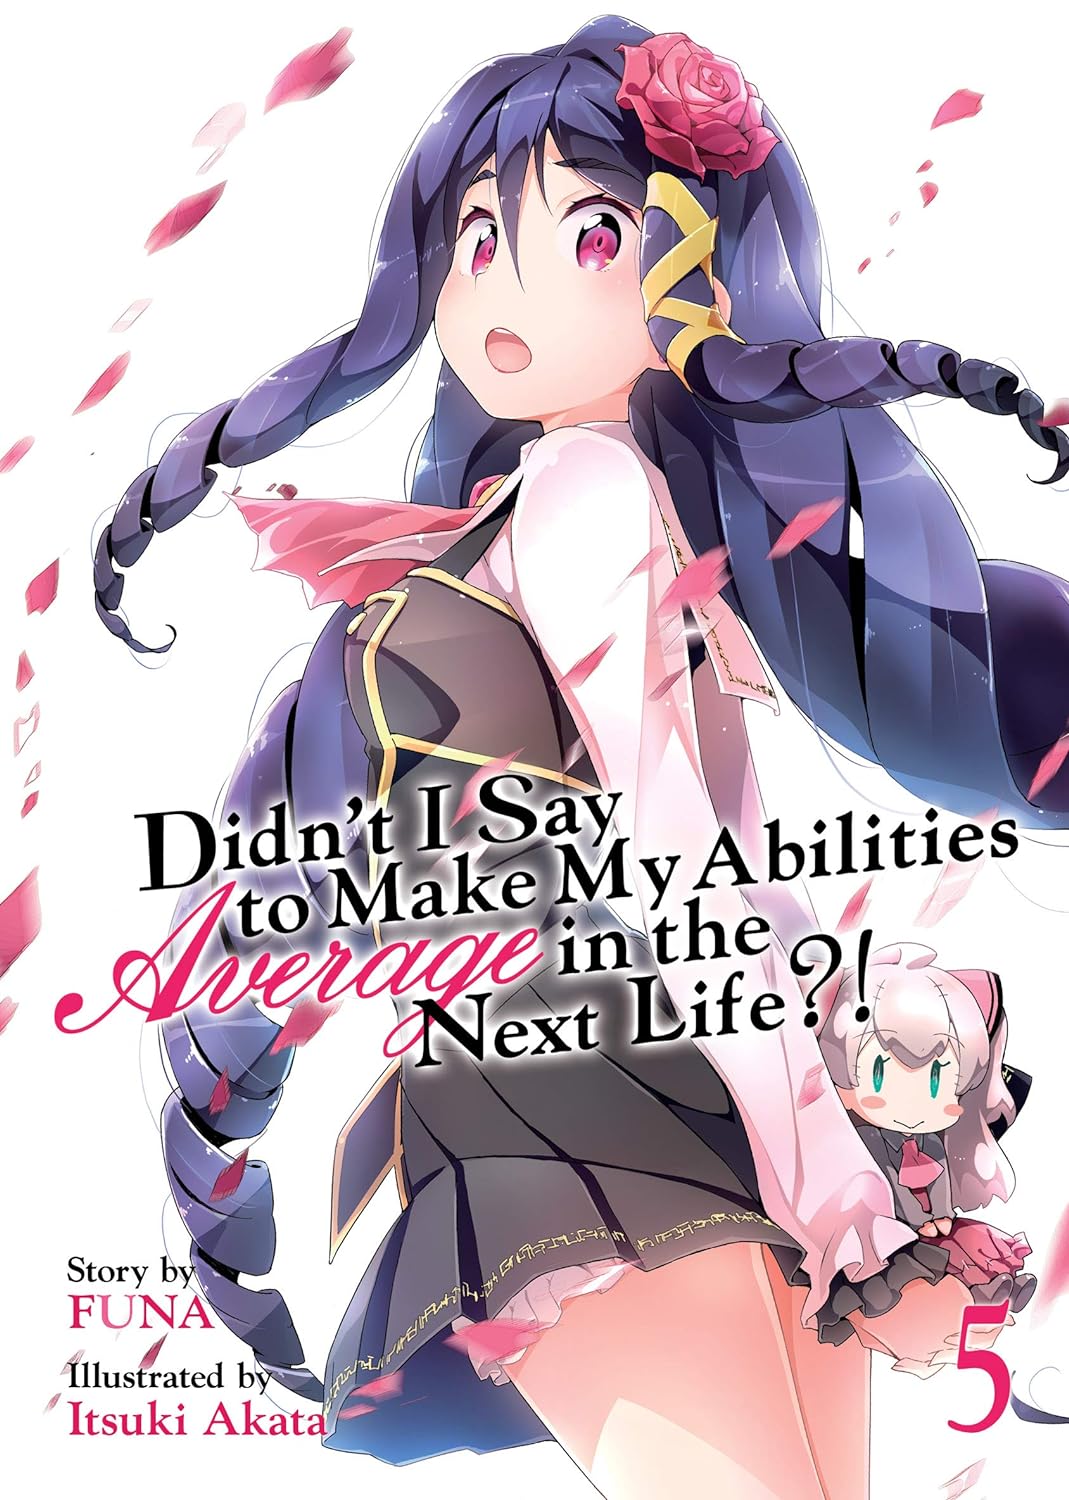 (02/01/2024) Didn't I Say to Make My Abilities Average in the Next Life?! (Light Novel) Vol. 17